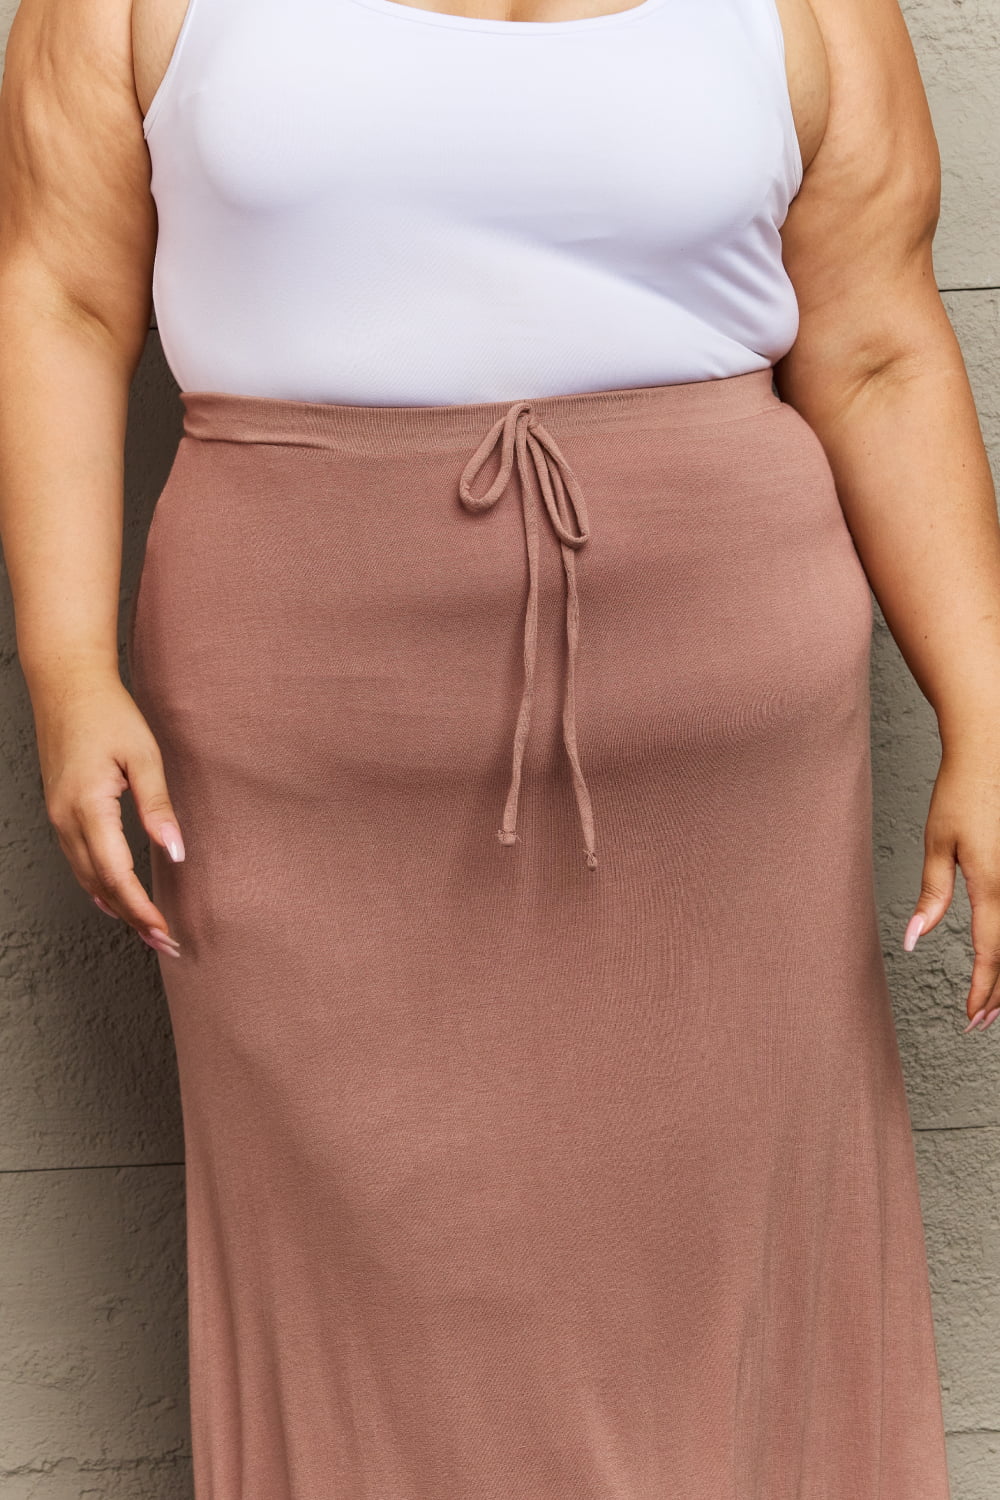 For The Day Flare Maxi Skirt- Chocolate